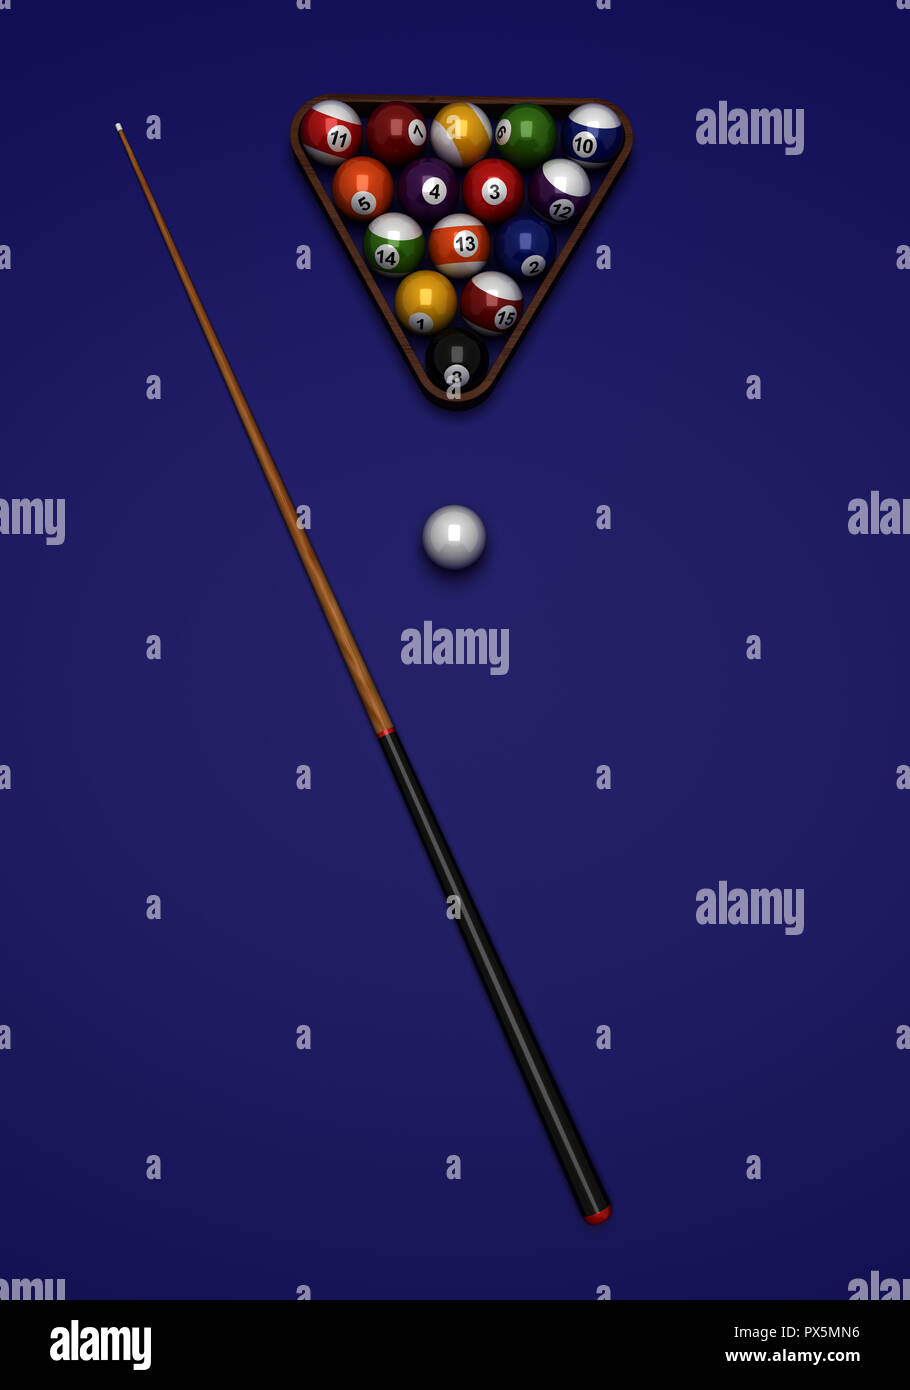 Billiard balls and cue from top view Stock Photo